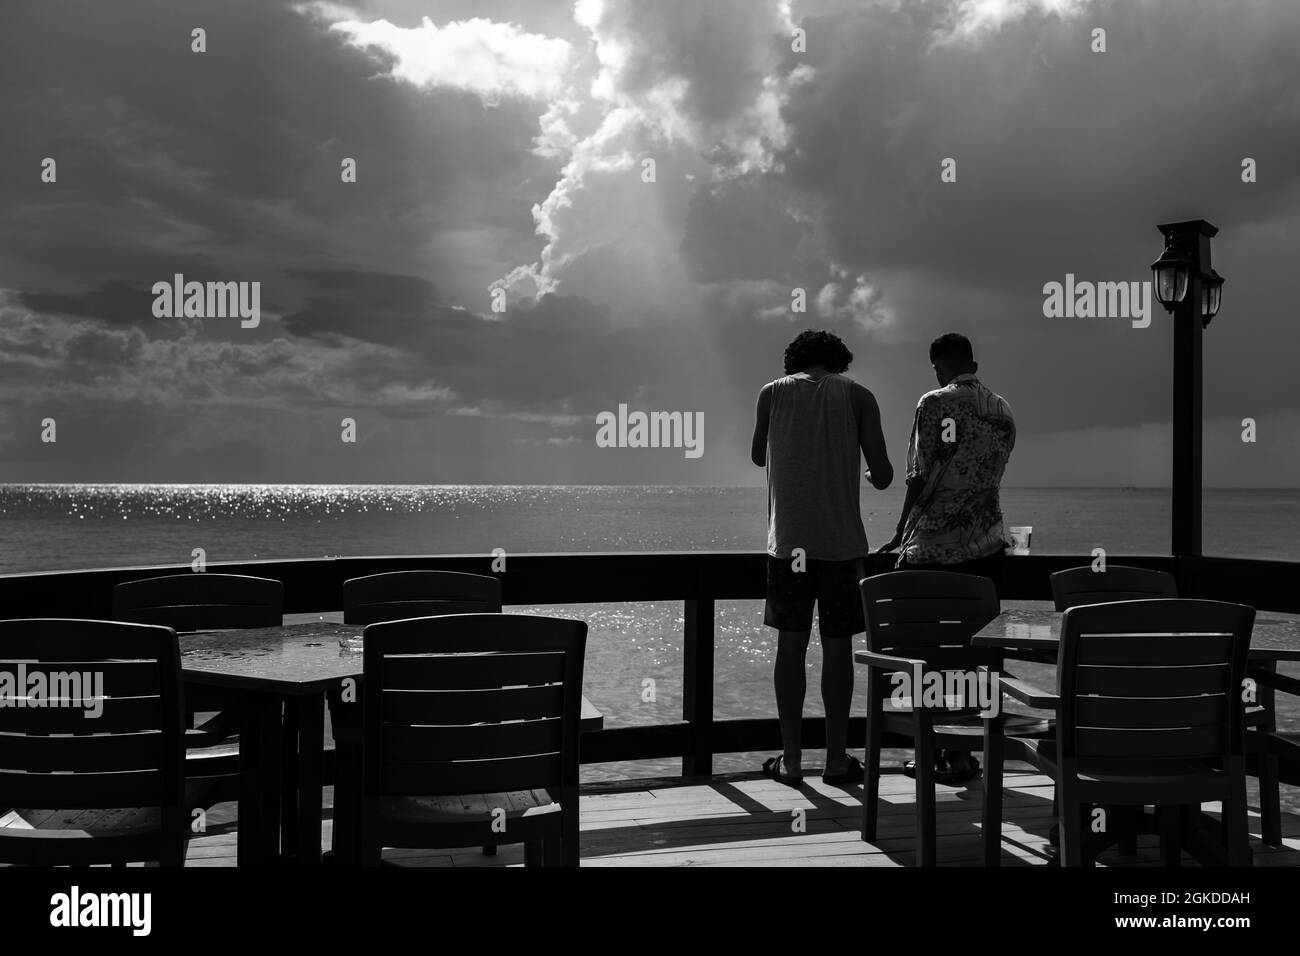 Two friends standing on a wooden terrace, enjoying the view of the sea, after a rainy episode. The sun pierces the clouds. Stock Photo